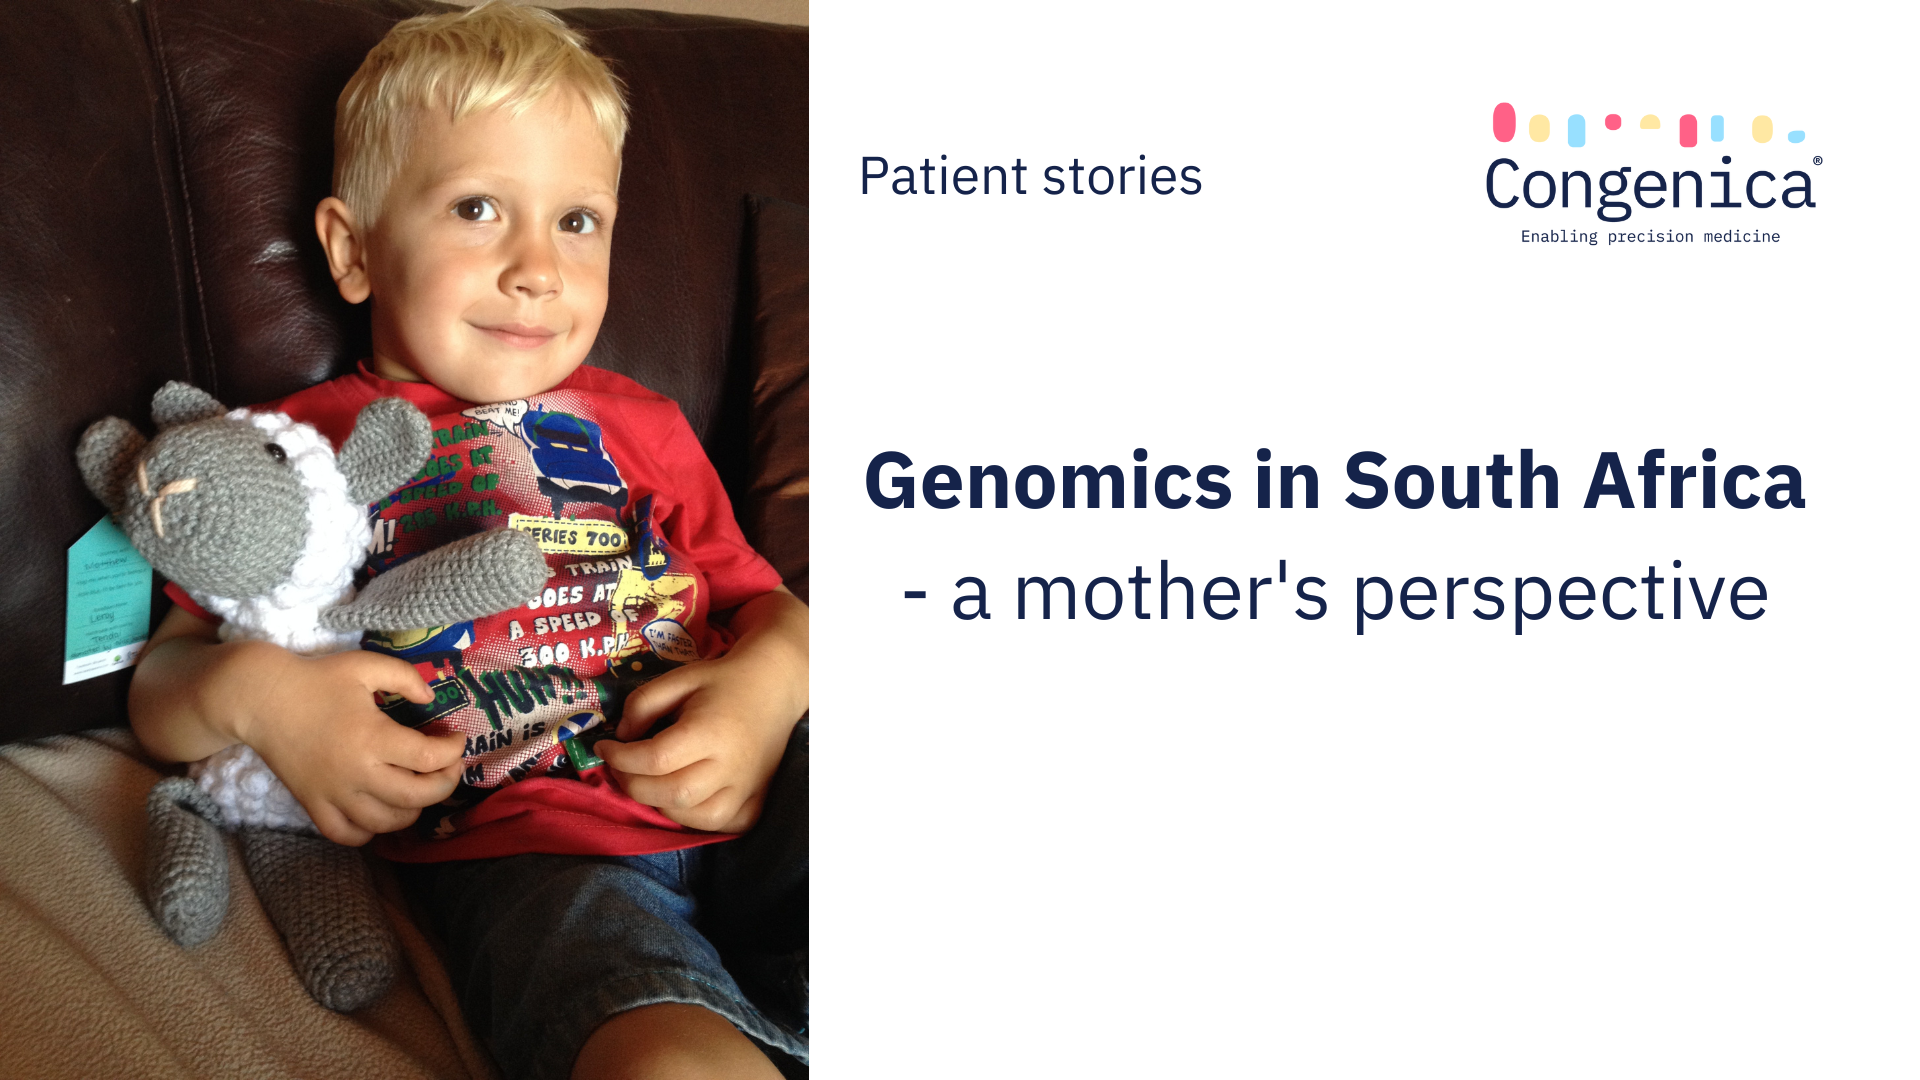 Genomics in South Africa